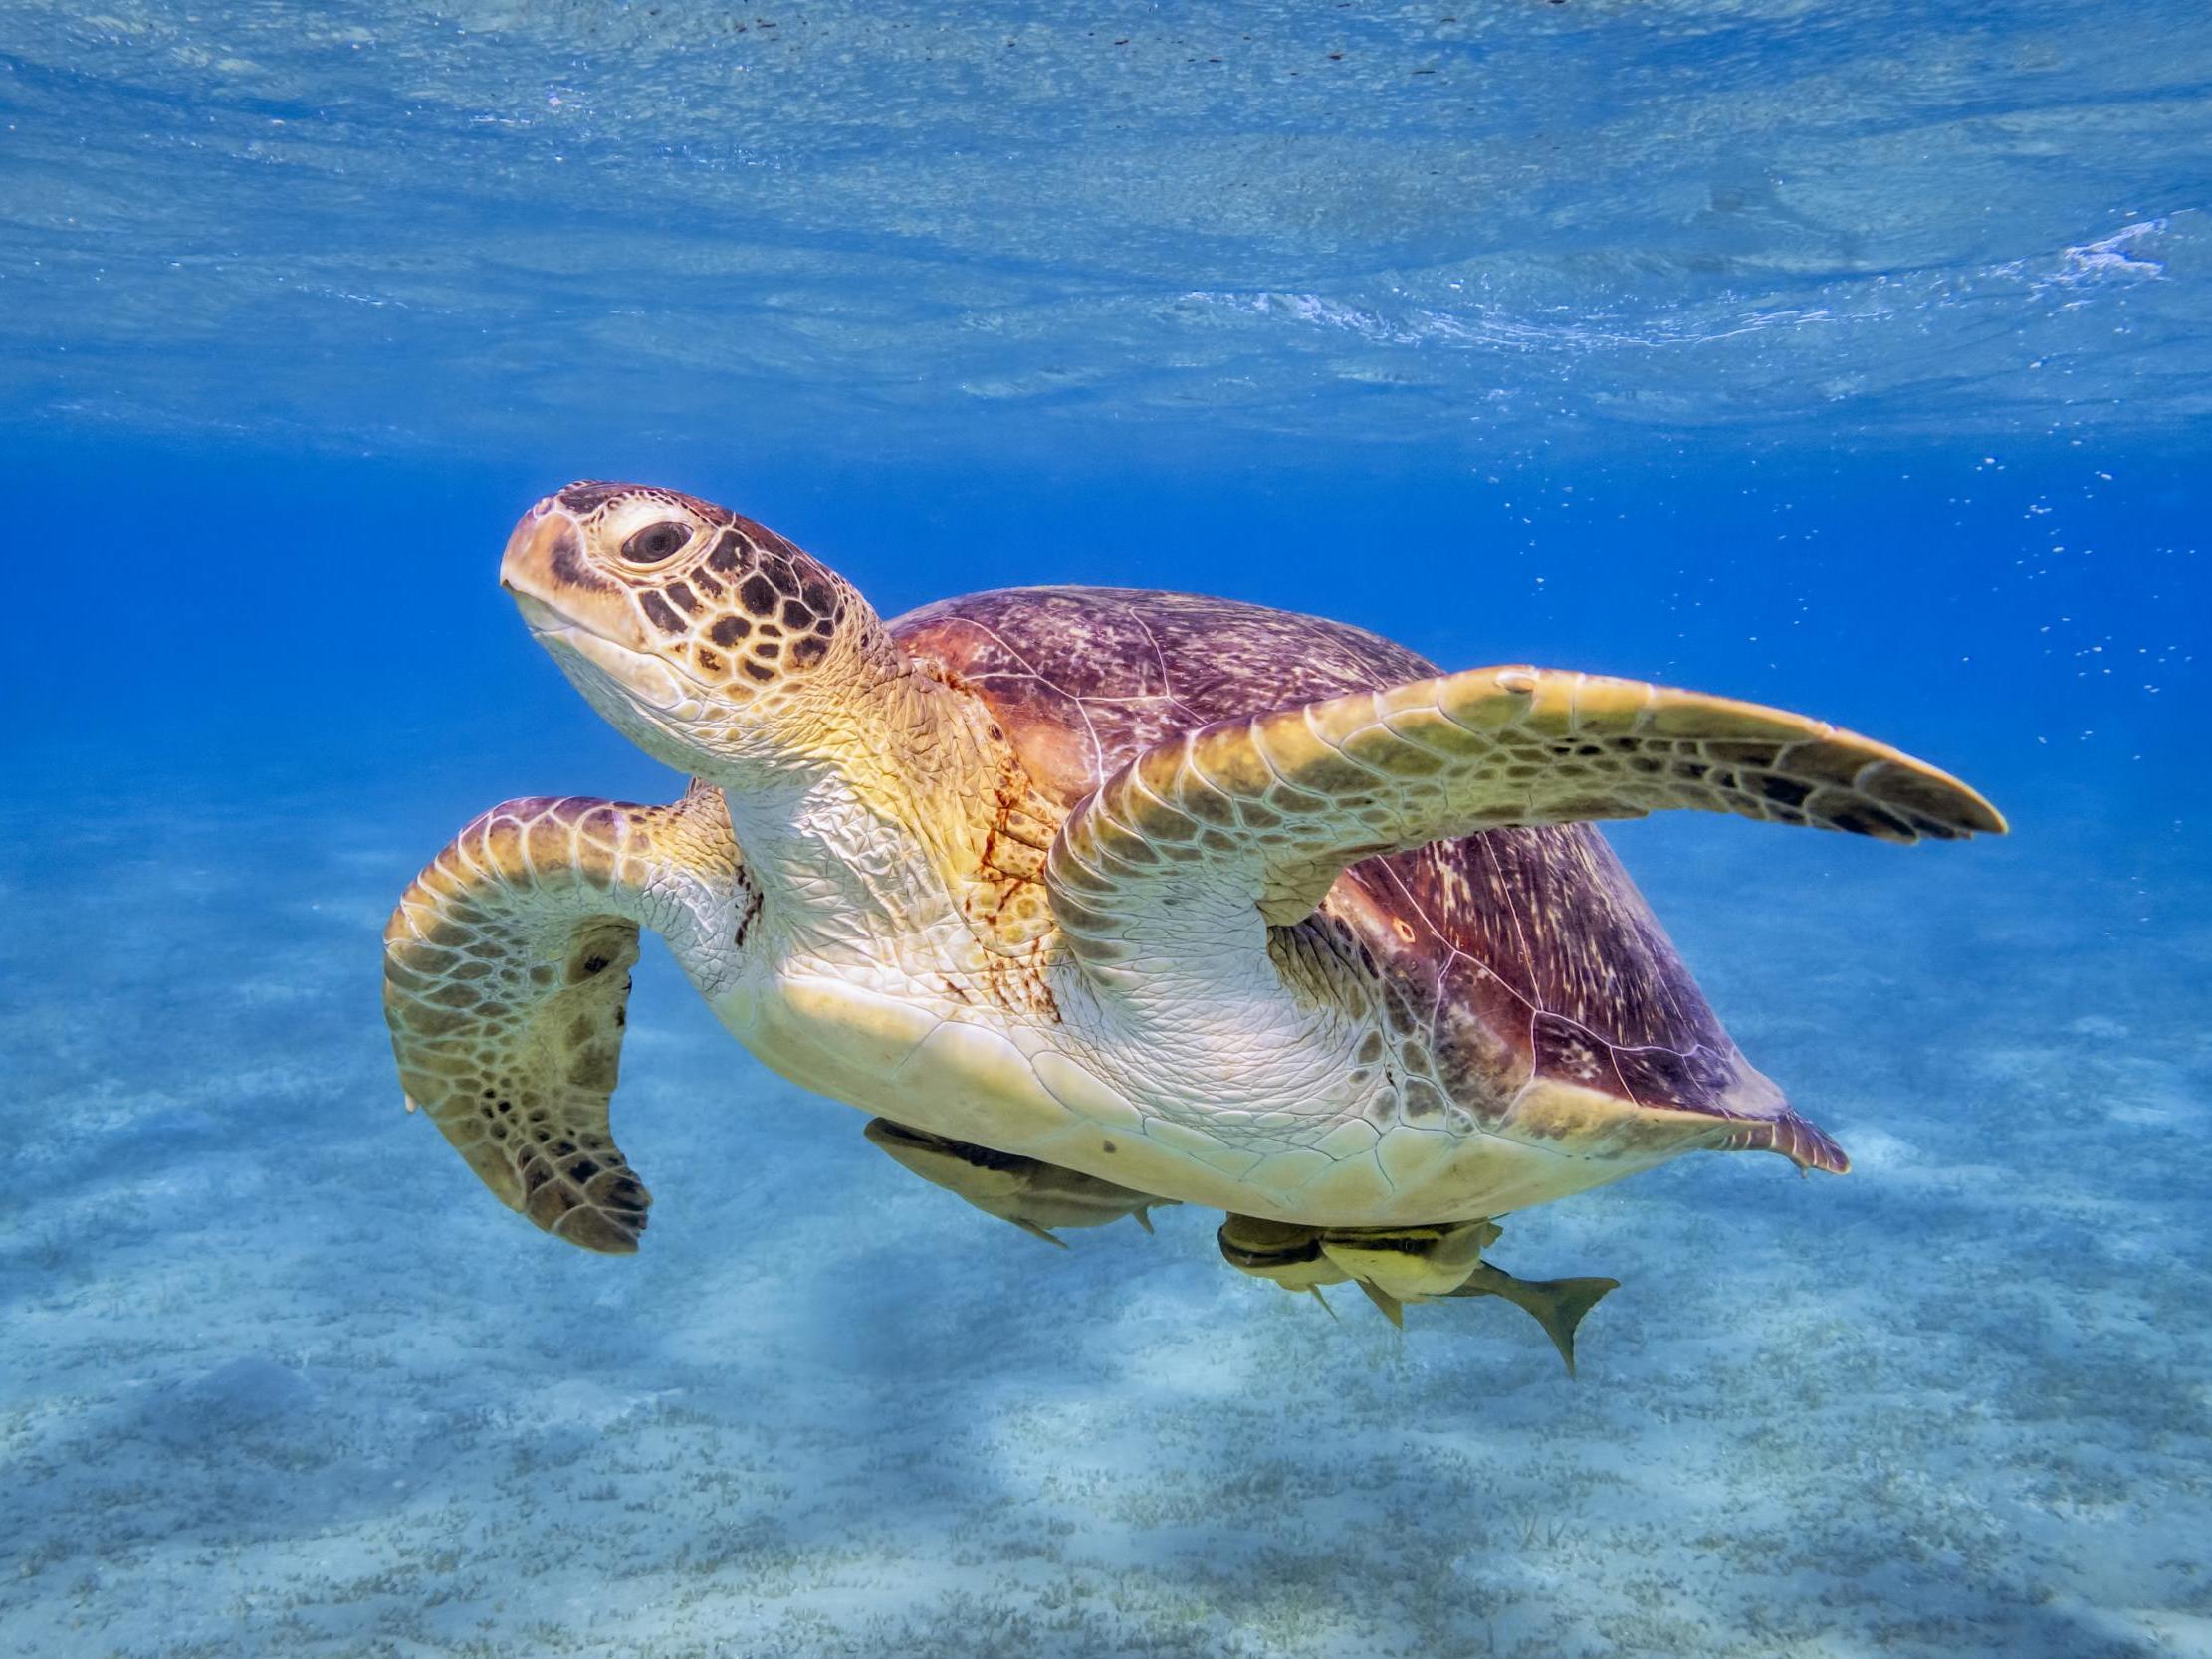 Green turtles are endangered and populations have reached historic lows over the last century